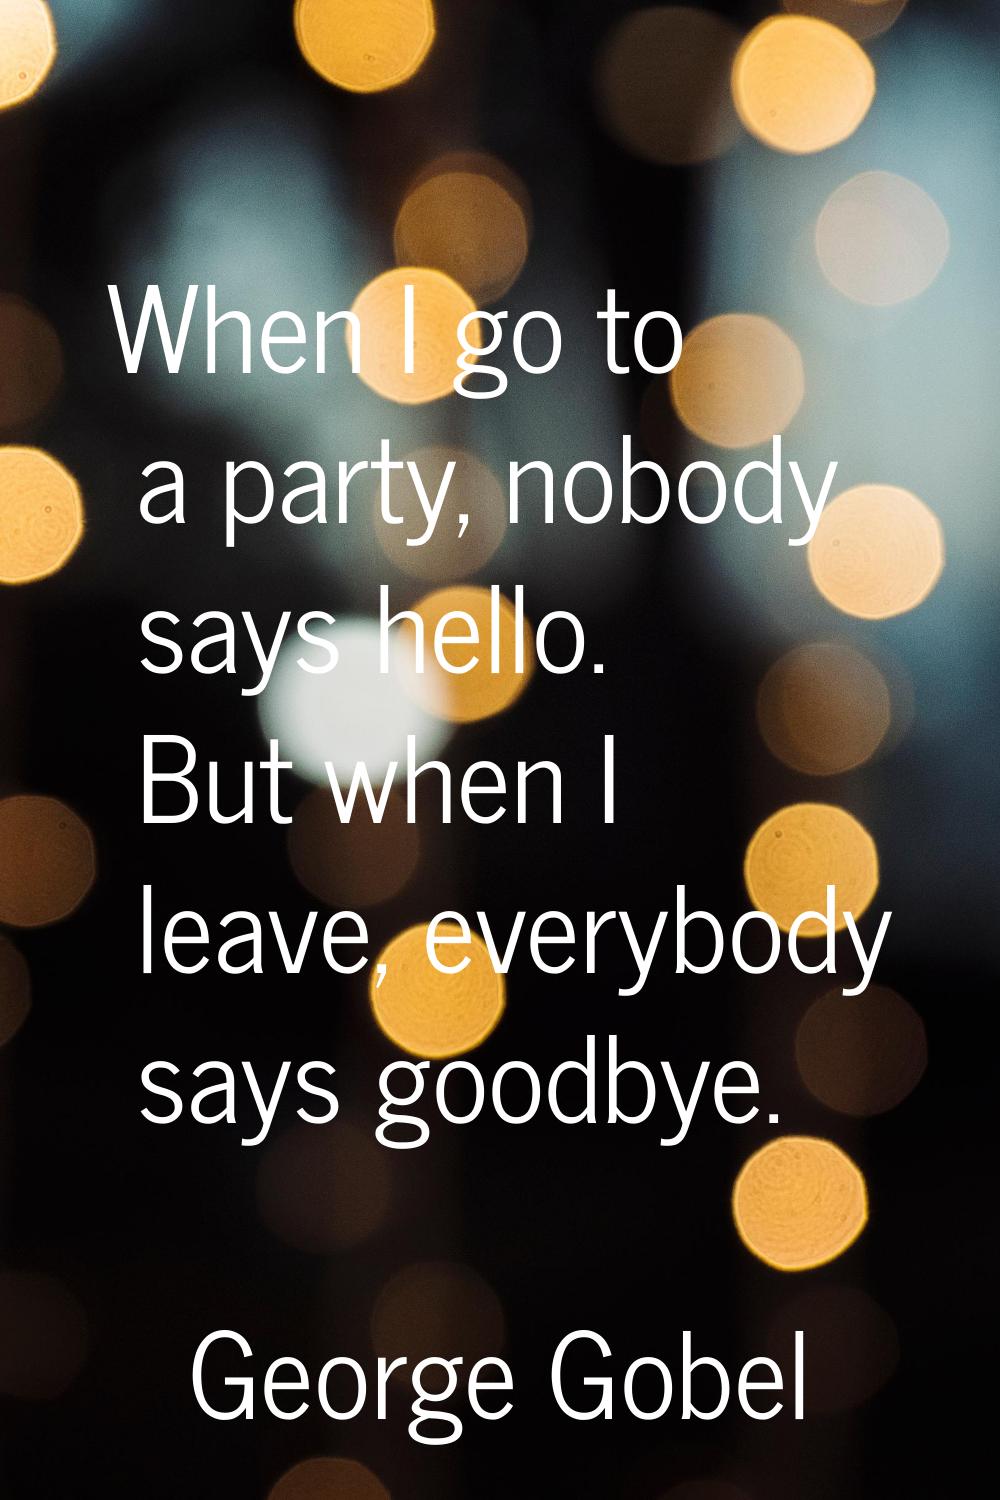 When I go to a party, nobody says hello. But when I leave, everybody says goodbye.